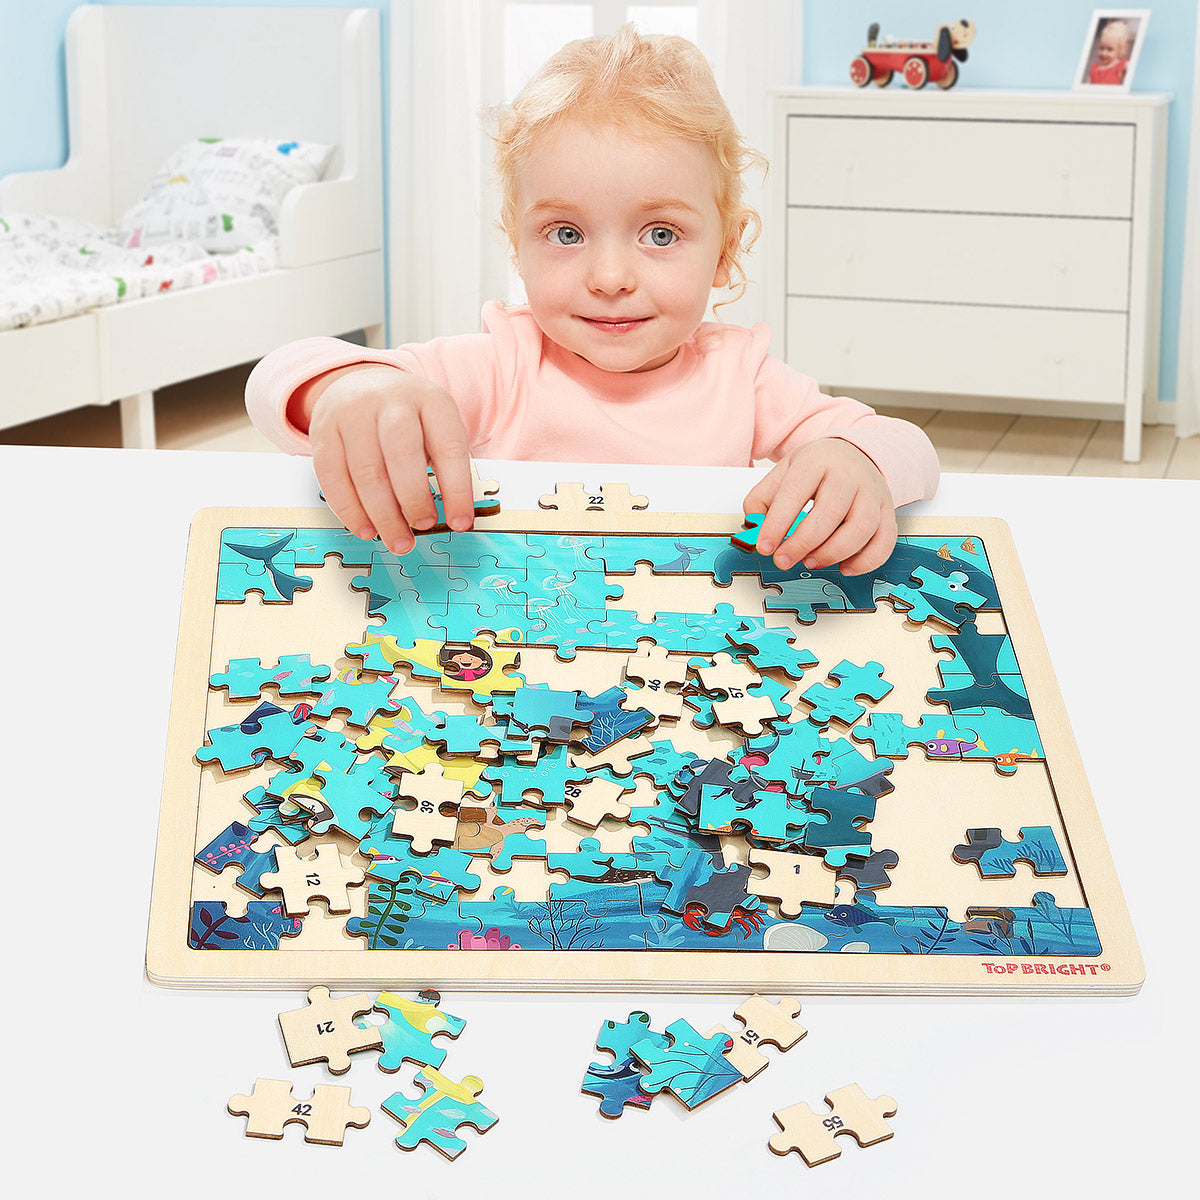 The puzzle pieces are made from high-quality solid wood, and thanks to the rounded corners and edges they are also easy to grip for little hands.